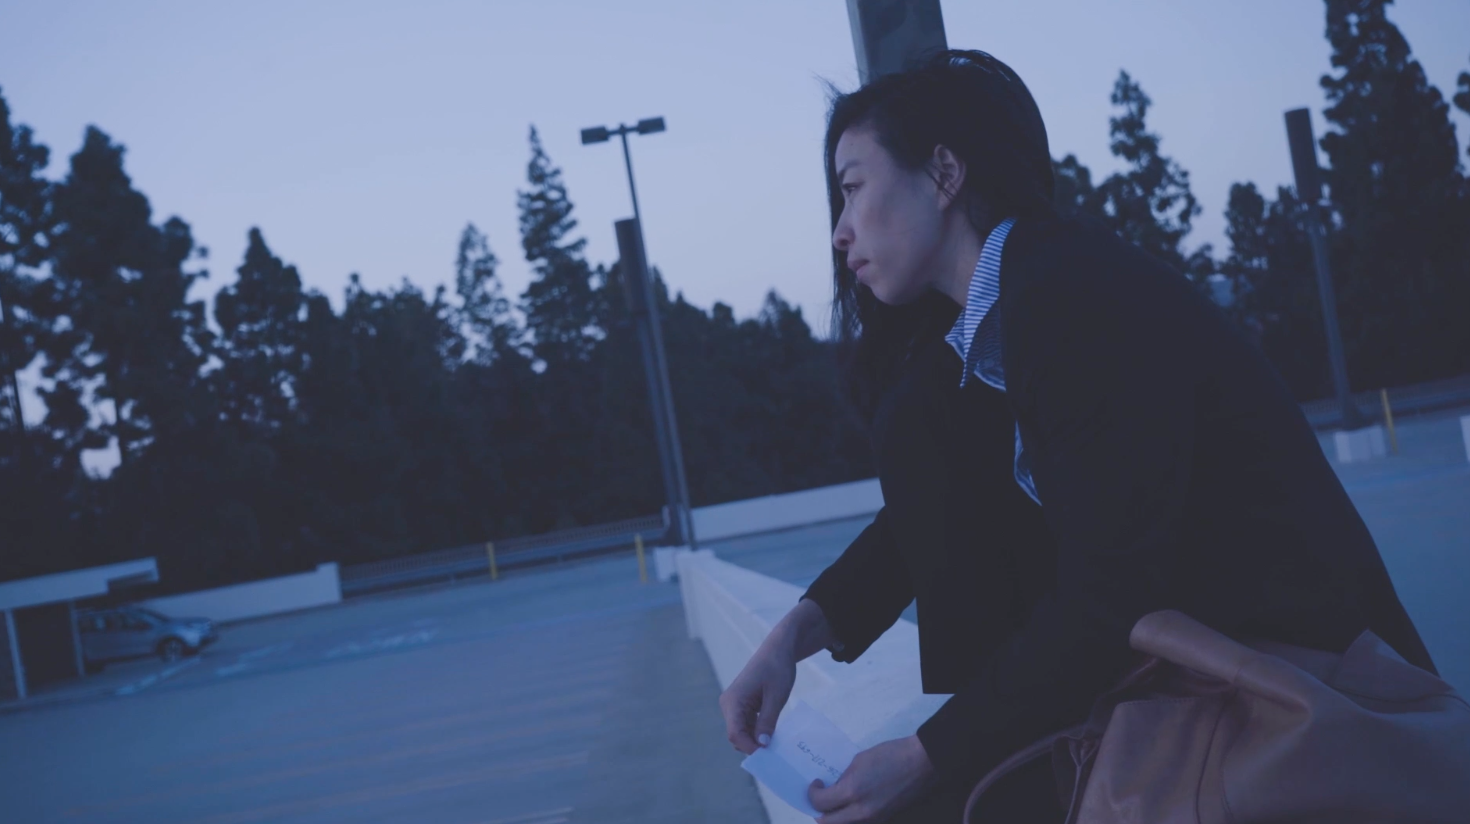 Completed filming Short Film “Echoes Of Departure” | Asian American Stories